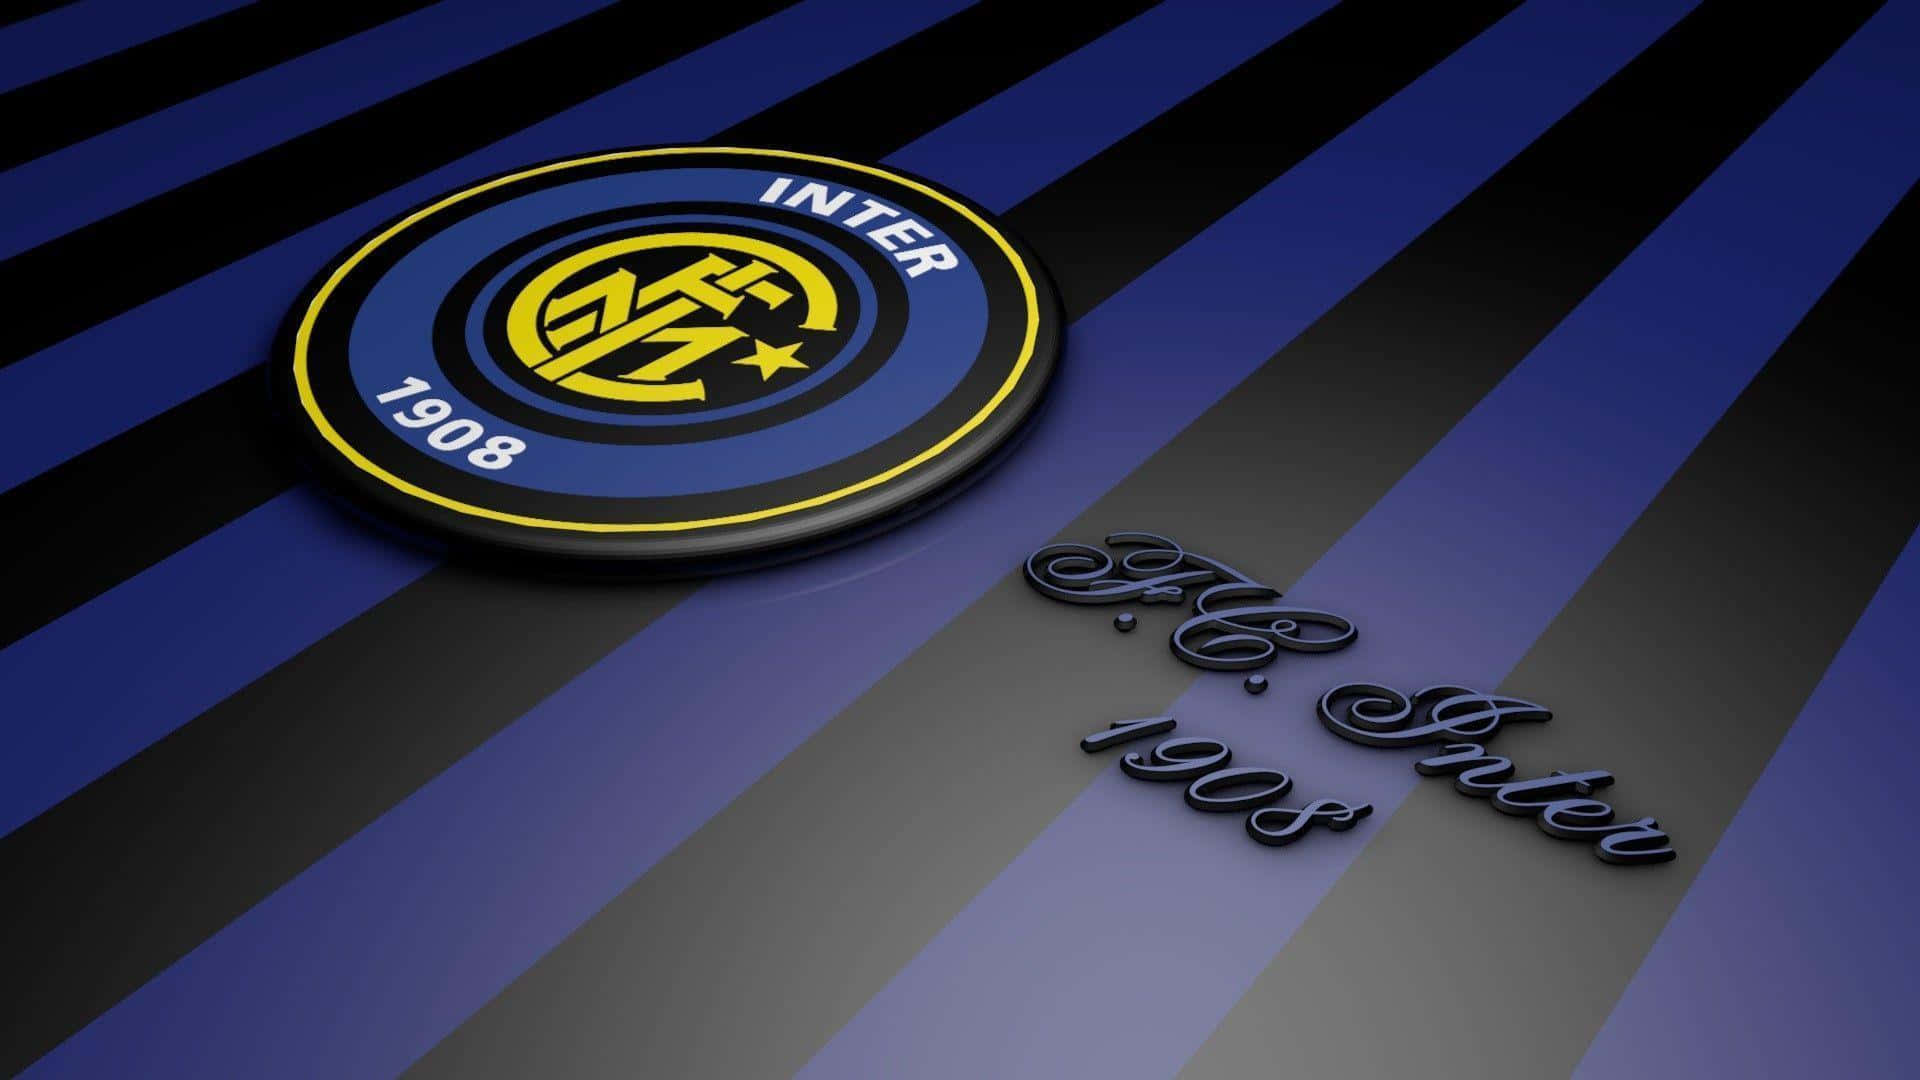 The Splendor and Passion of Inter Milan Wallpaper